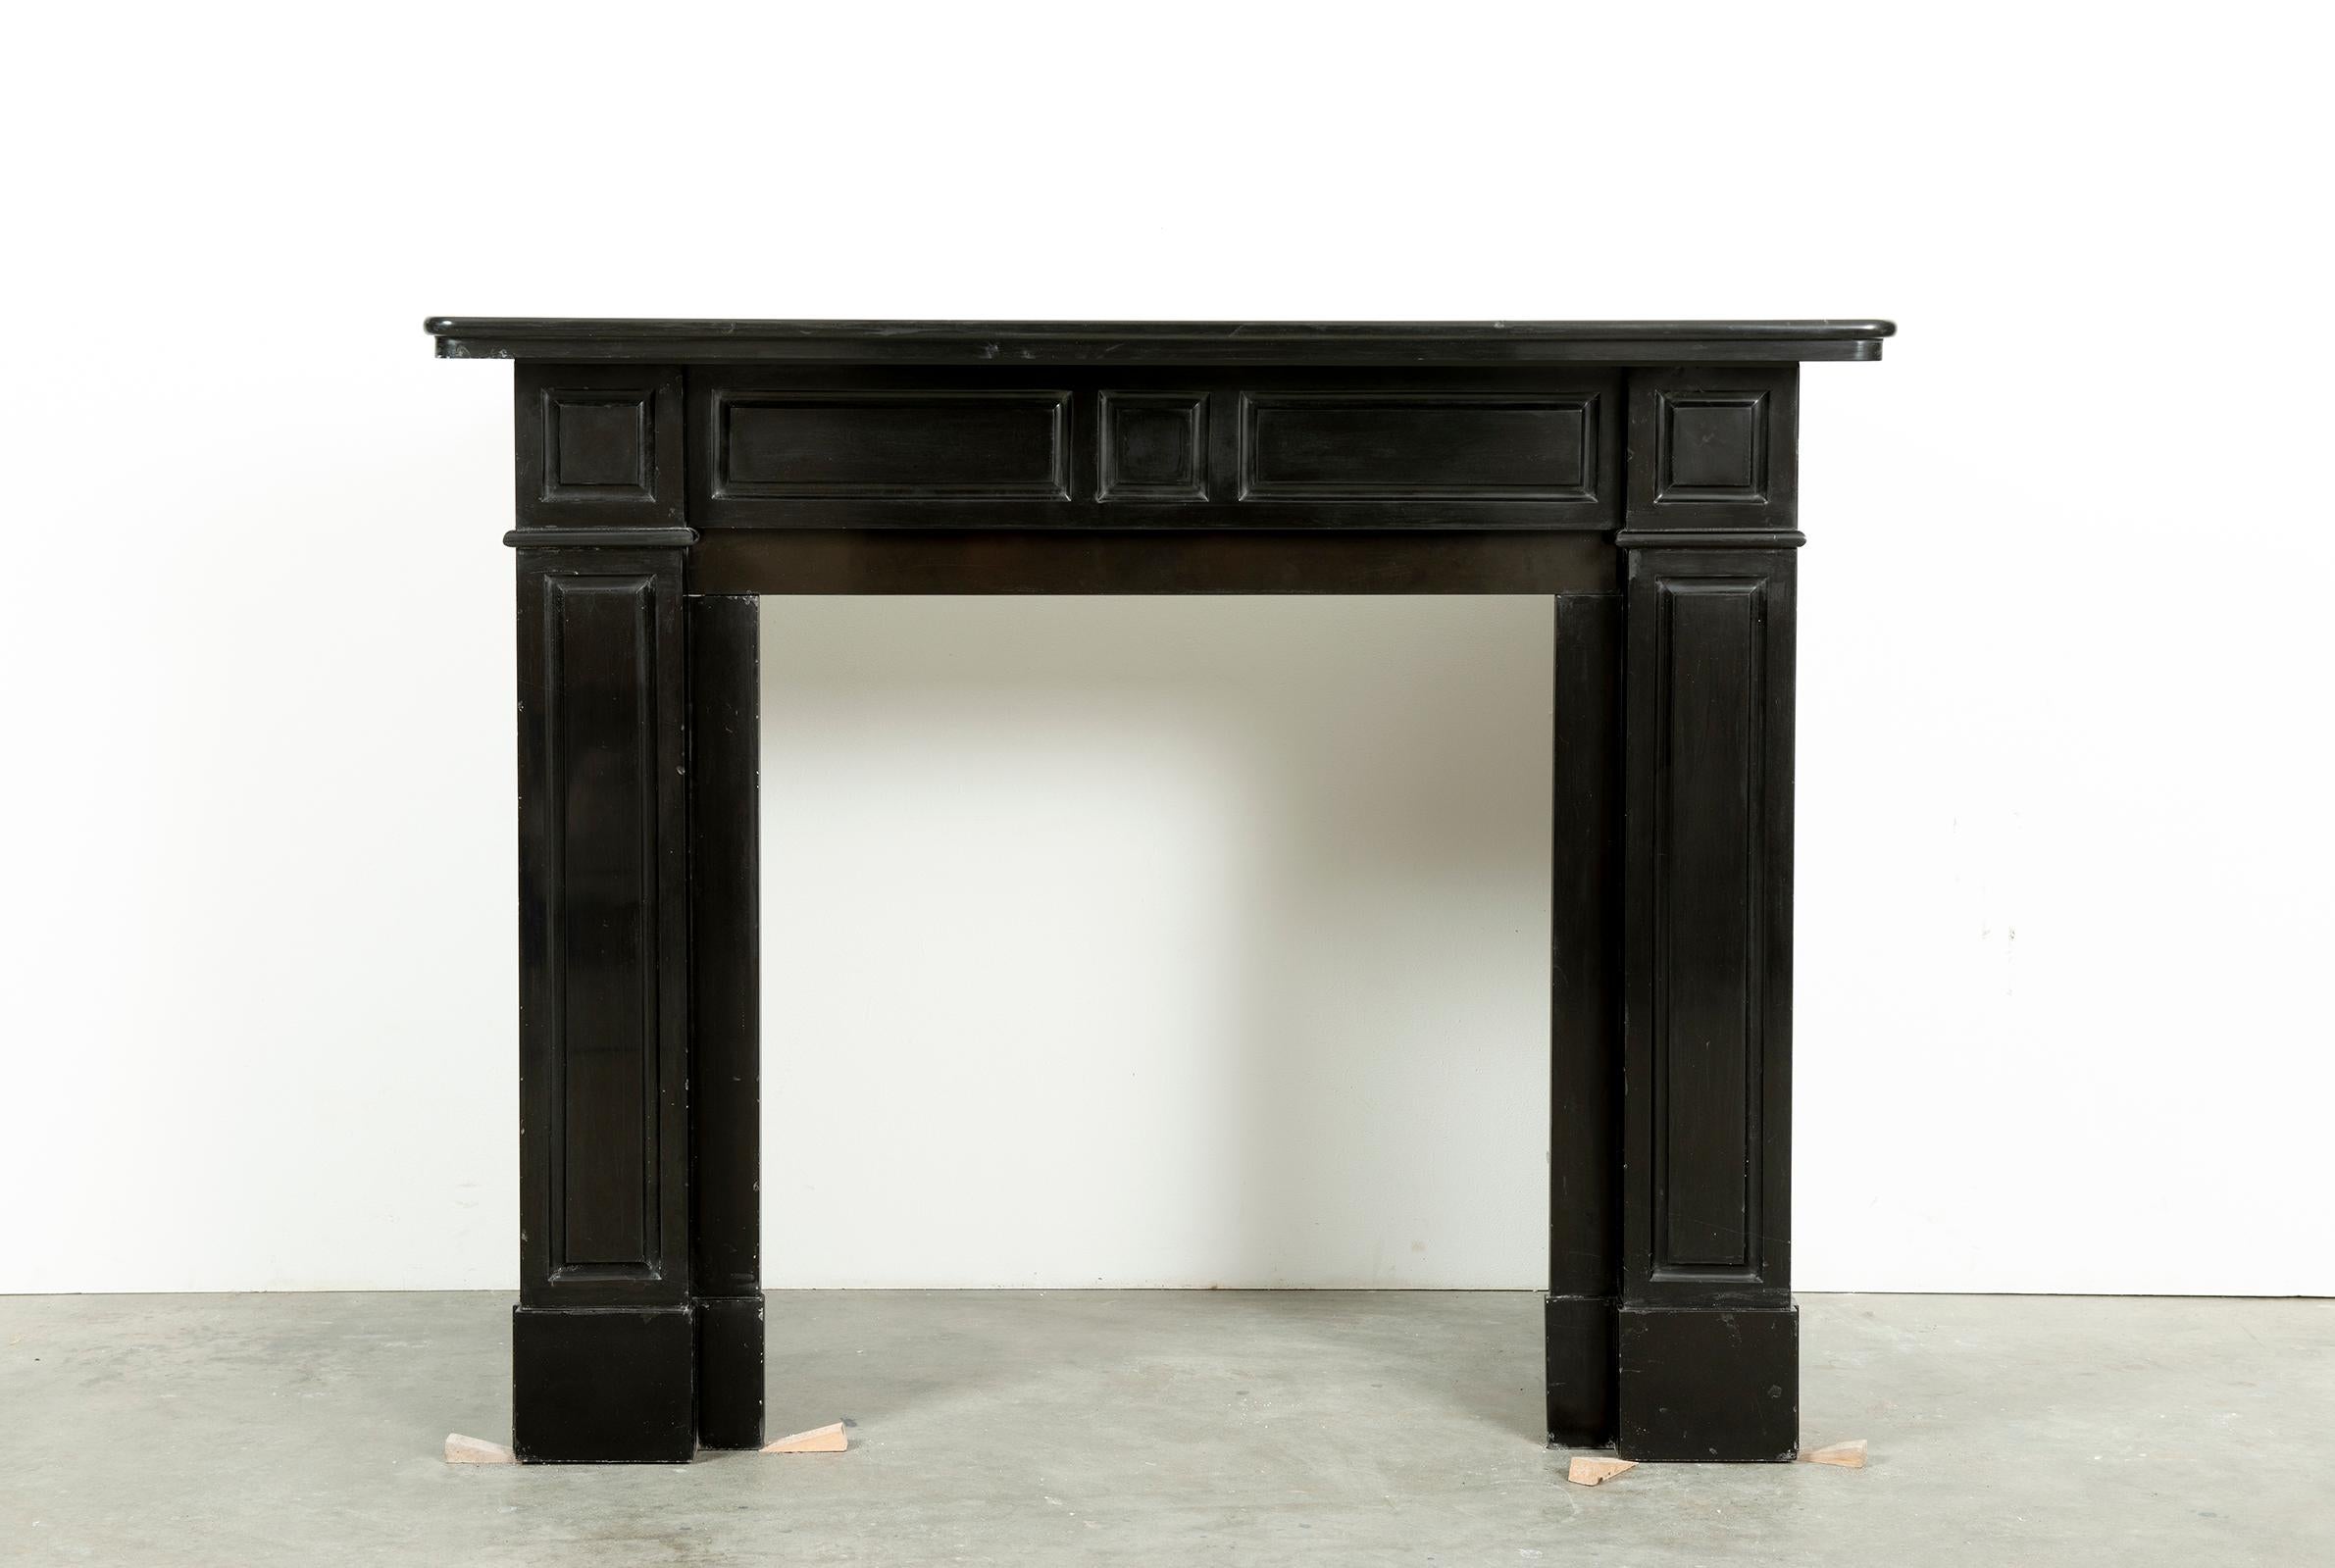 A nice Dutch paneled fireplace in Belgian black marble.
This deep black marble come from the quarry of Mazy.
Made between 1920 and 1970 these mantels where used all over Holland, usually in multi story houses with on each floor two similar